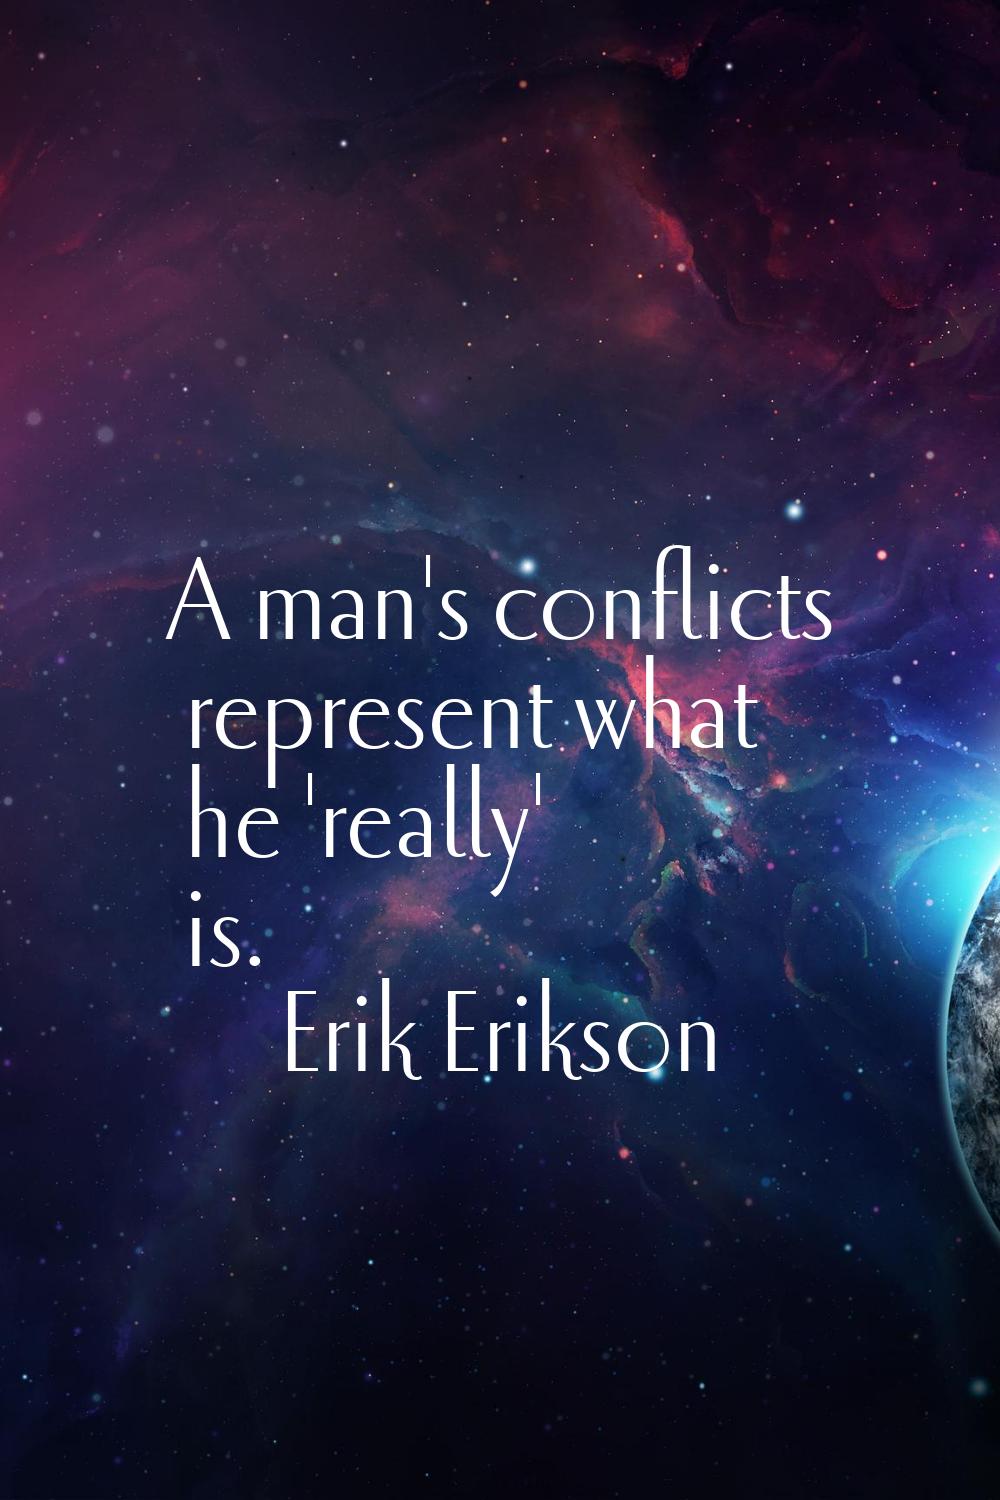 A man's conflicts represent what he 'really' is.